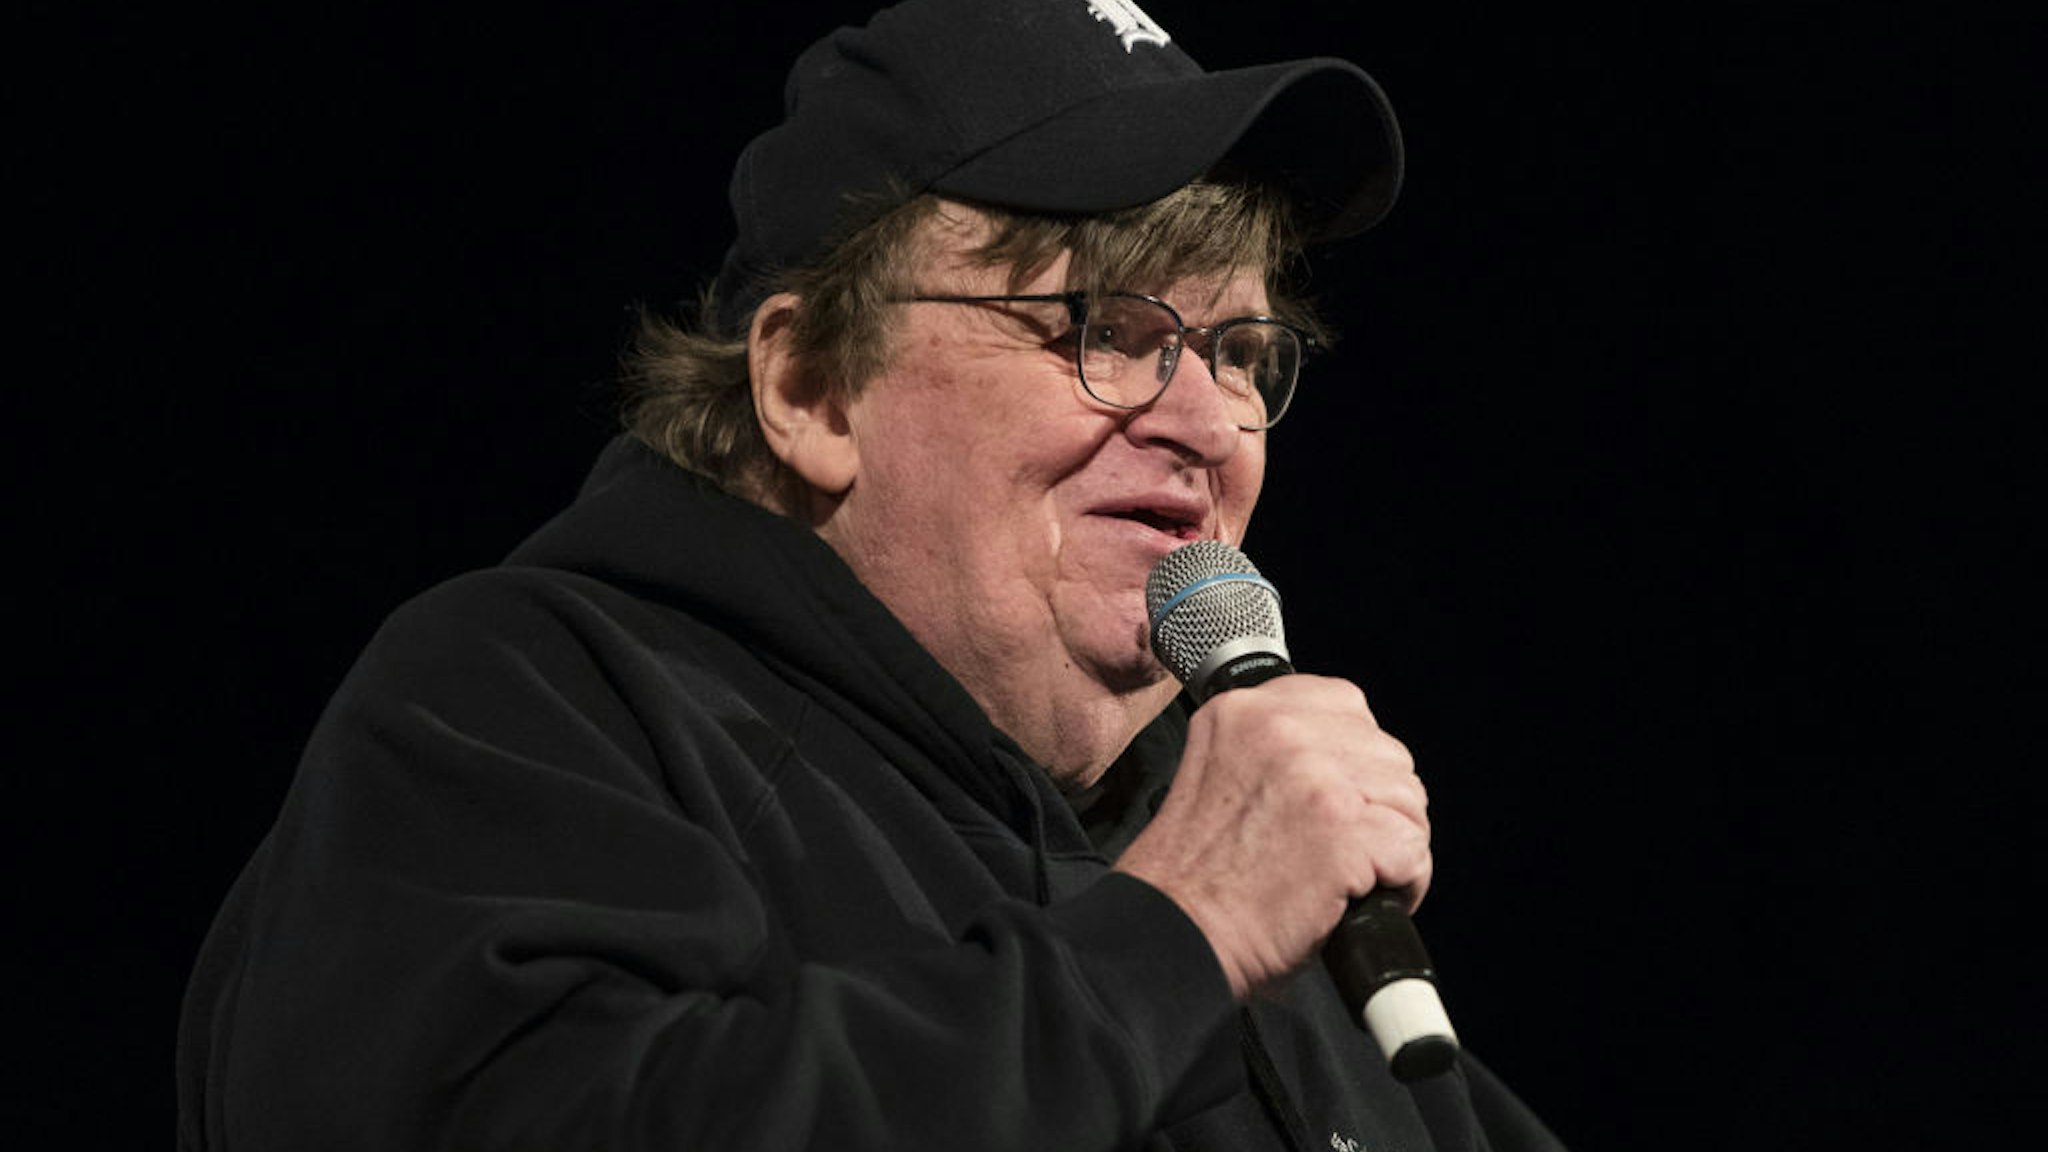 Michael Moore, American filmmaker, speaks during a campaign event for Senator Bernie Sanders, an Independent from Vermont and 2020 presidential candidate, during a town hall event in Rochester, New Hampshire, U.S., on Saturday, Feb. 8, 2020. Sanders is favored to win New Hampshire, but recent polls showed Pete Buttigieg cutting into his lead. Photographer: Adam Glanzman/Bloomberg via Getty Images